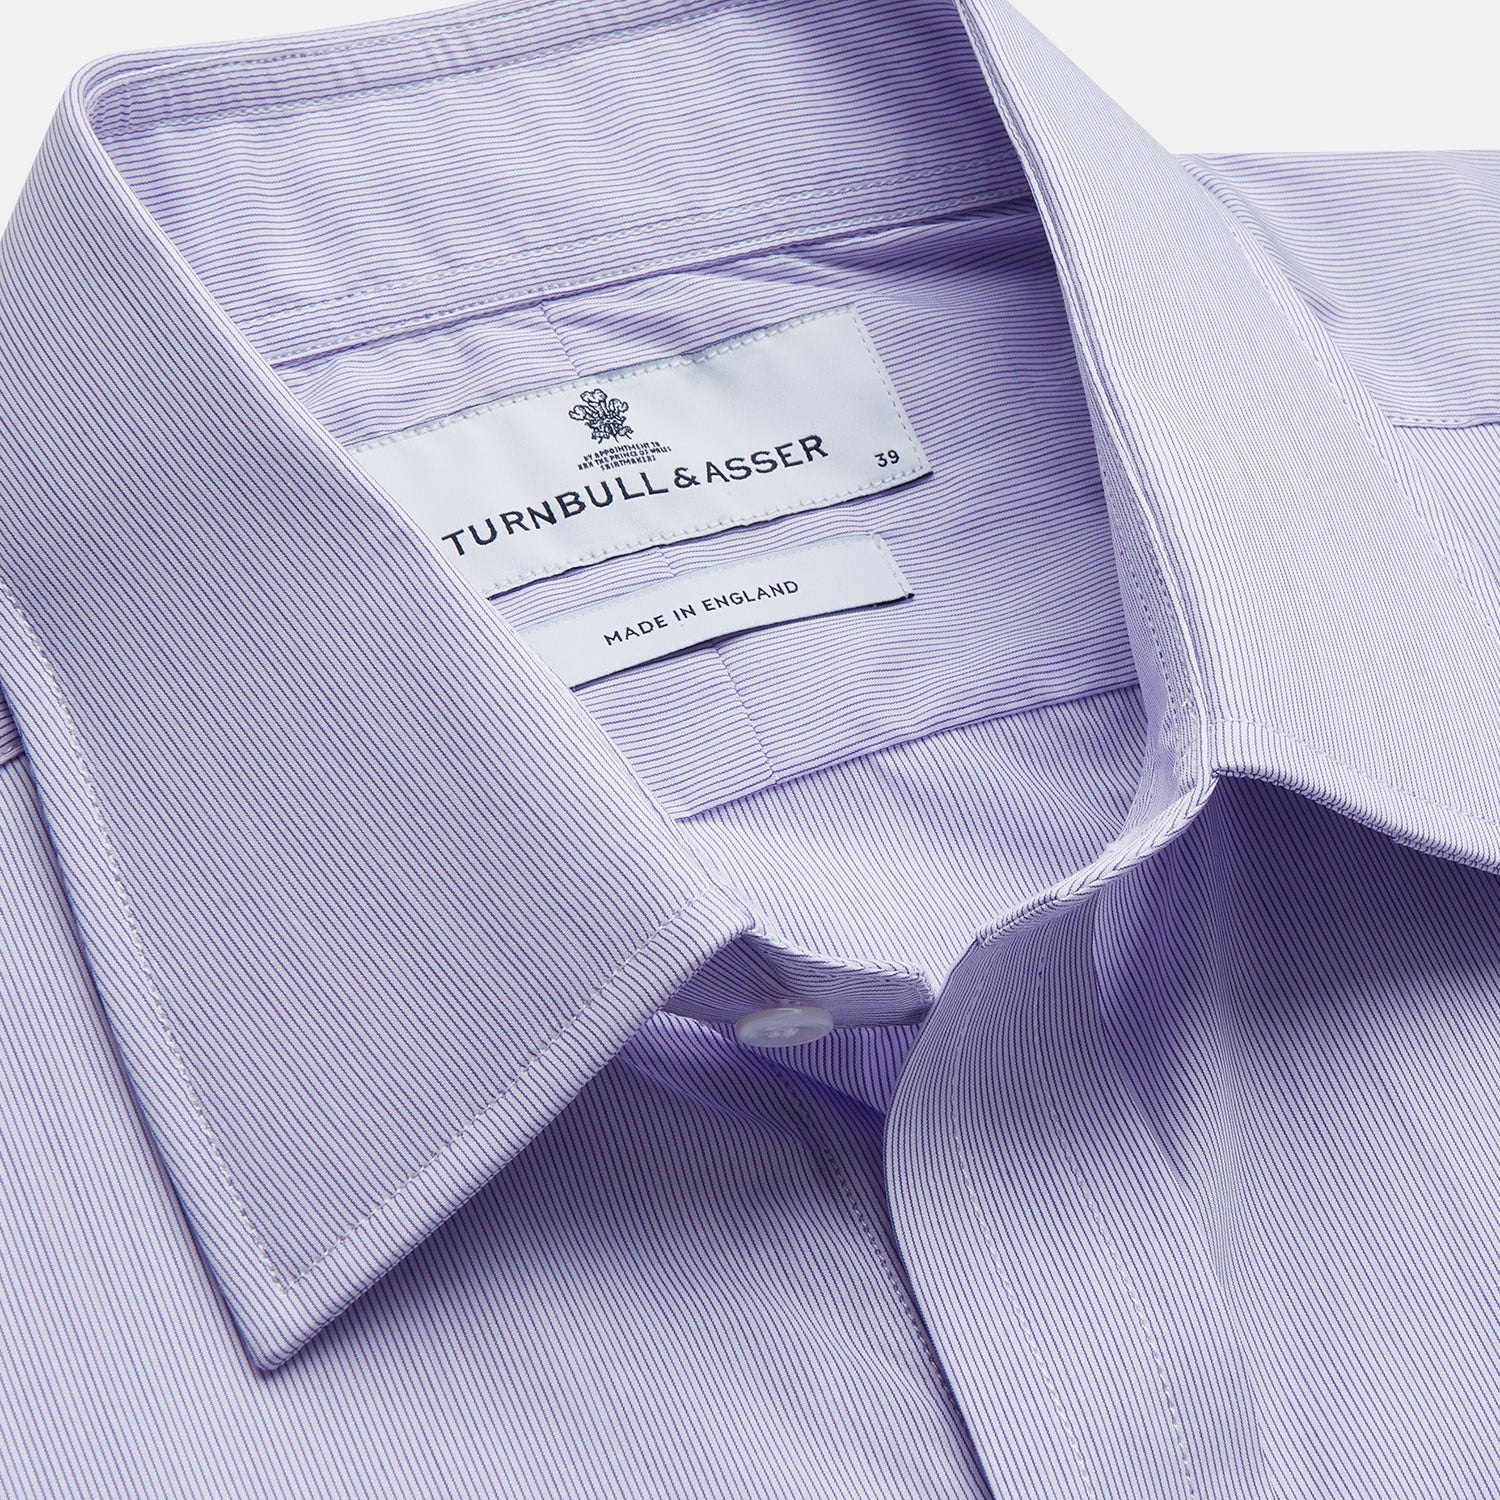 Purple Hairline Stripe Regular Fit Twill Shirt with T&A Collar and Double Cuffs